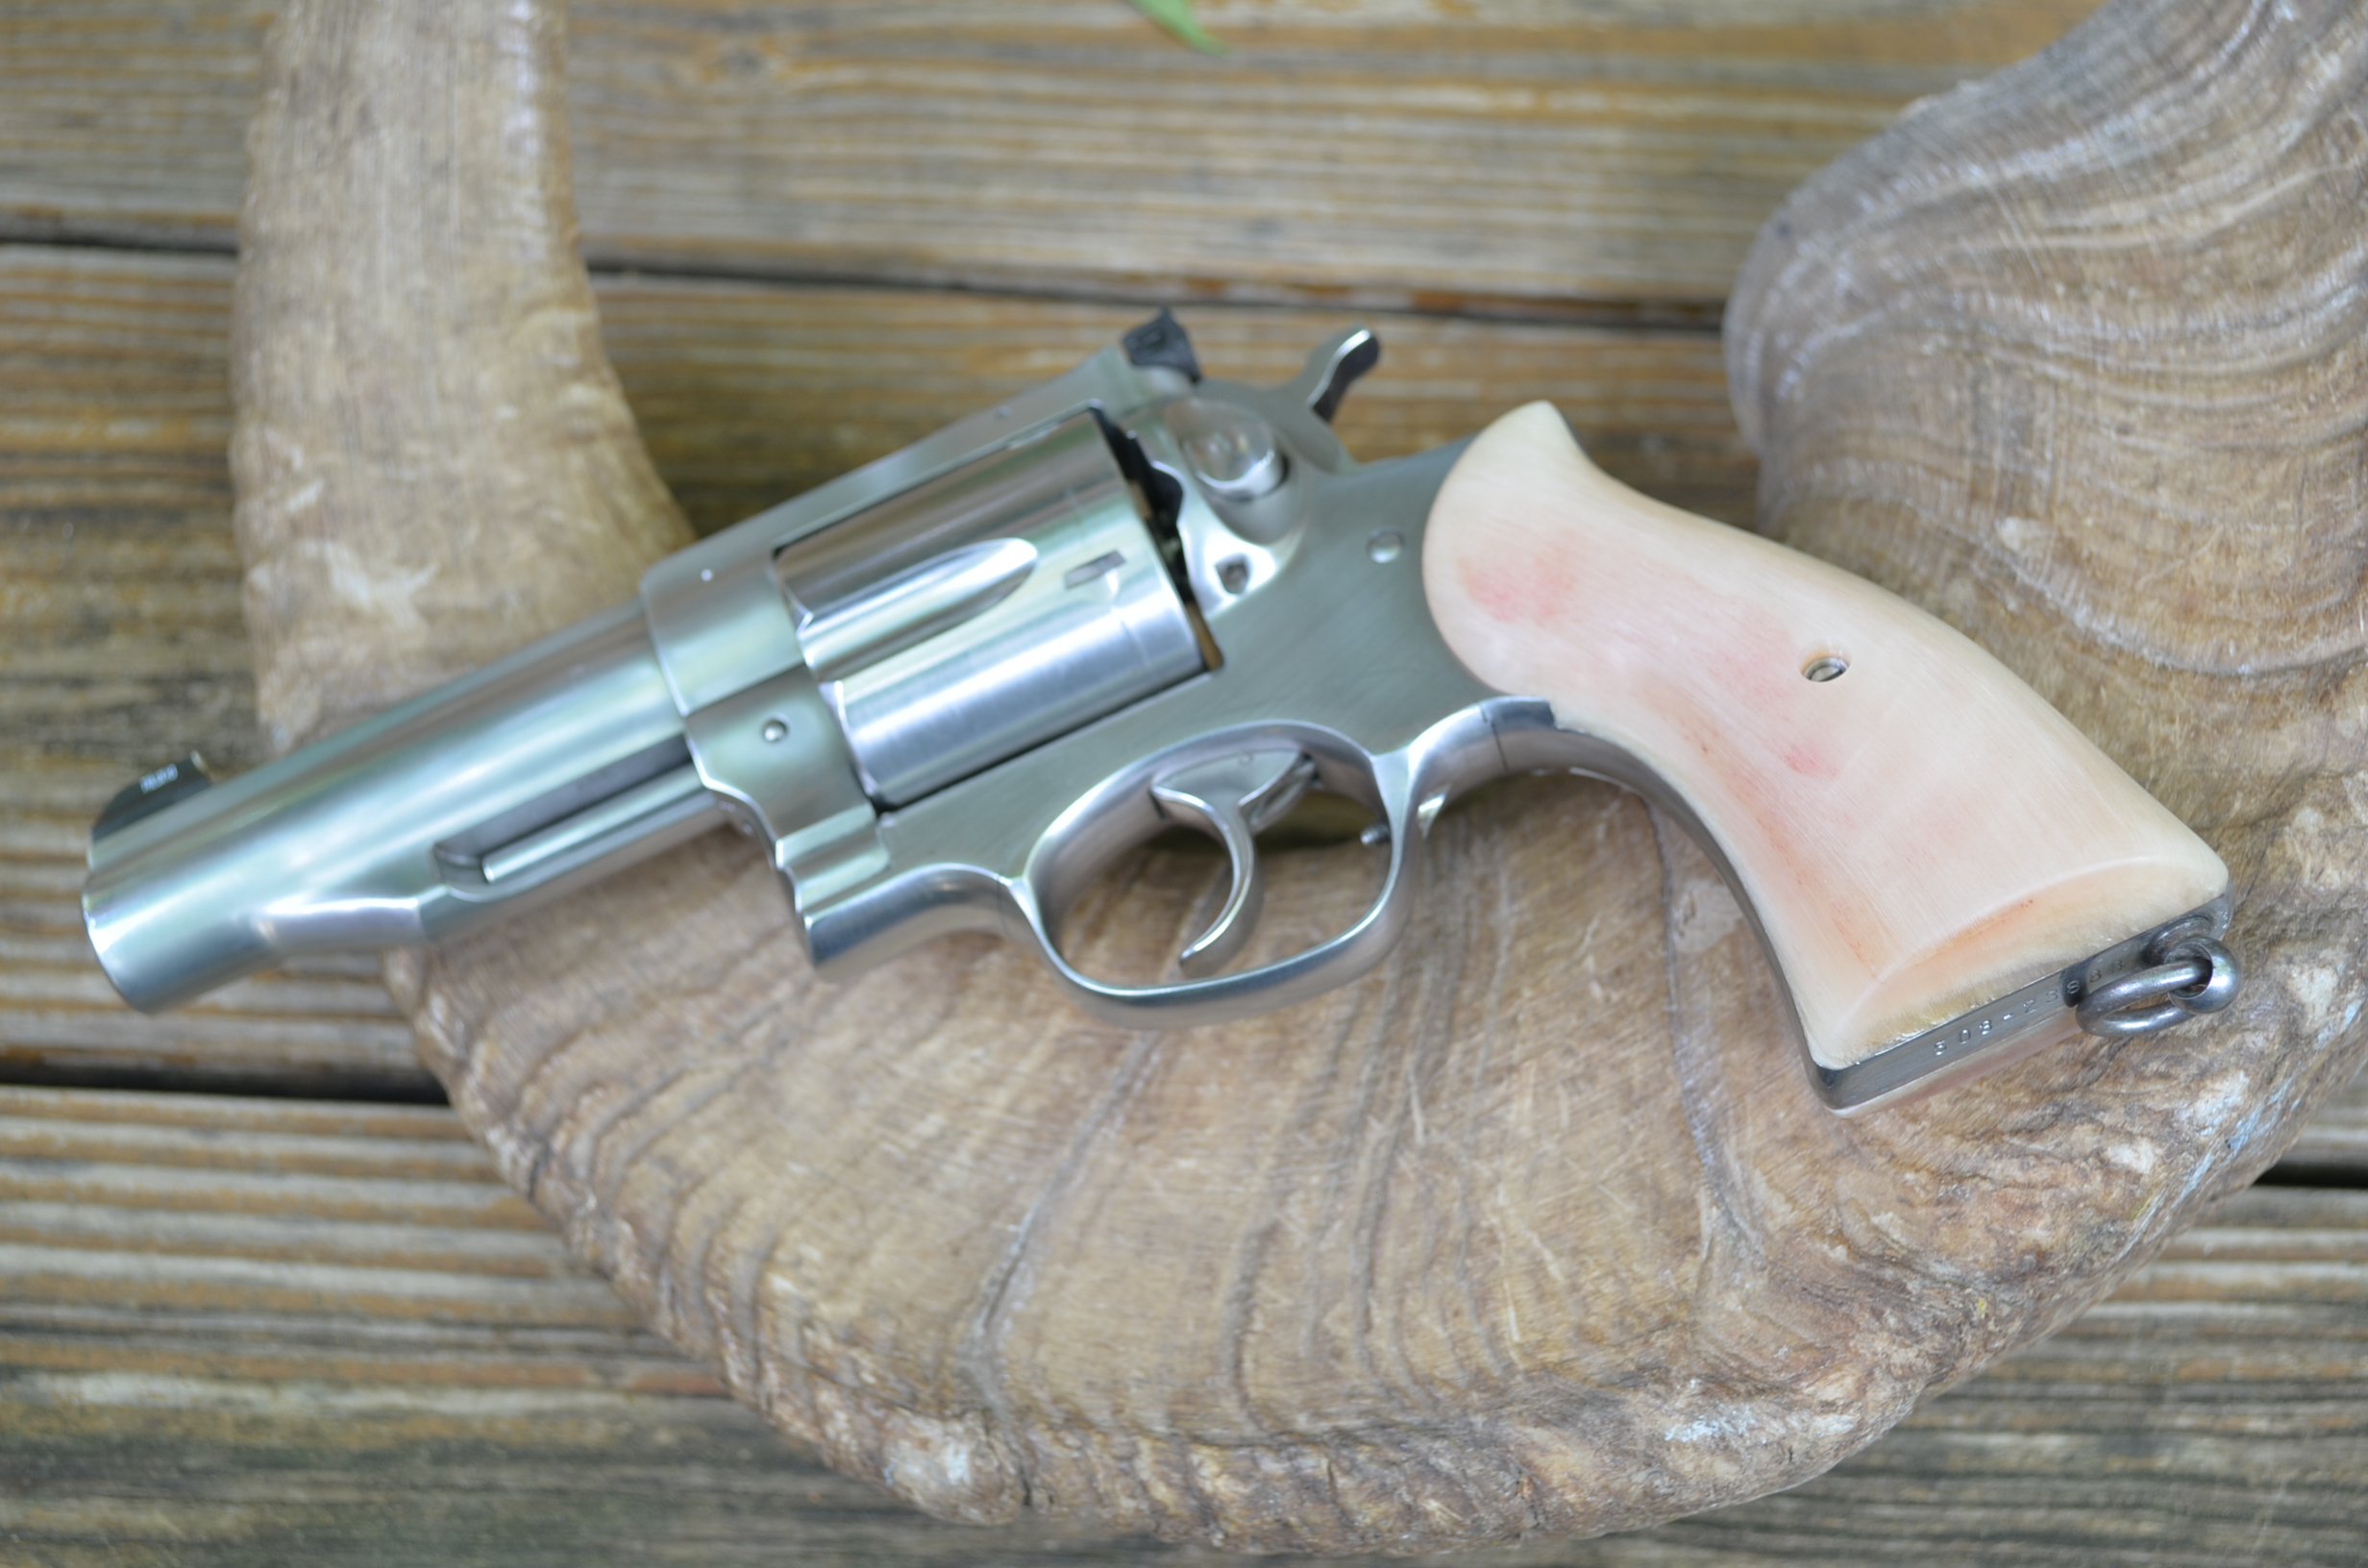 3) A Bowen Classic Arms Ruger Redhawk. 